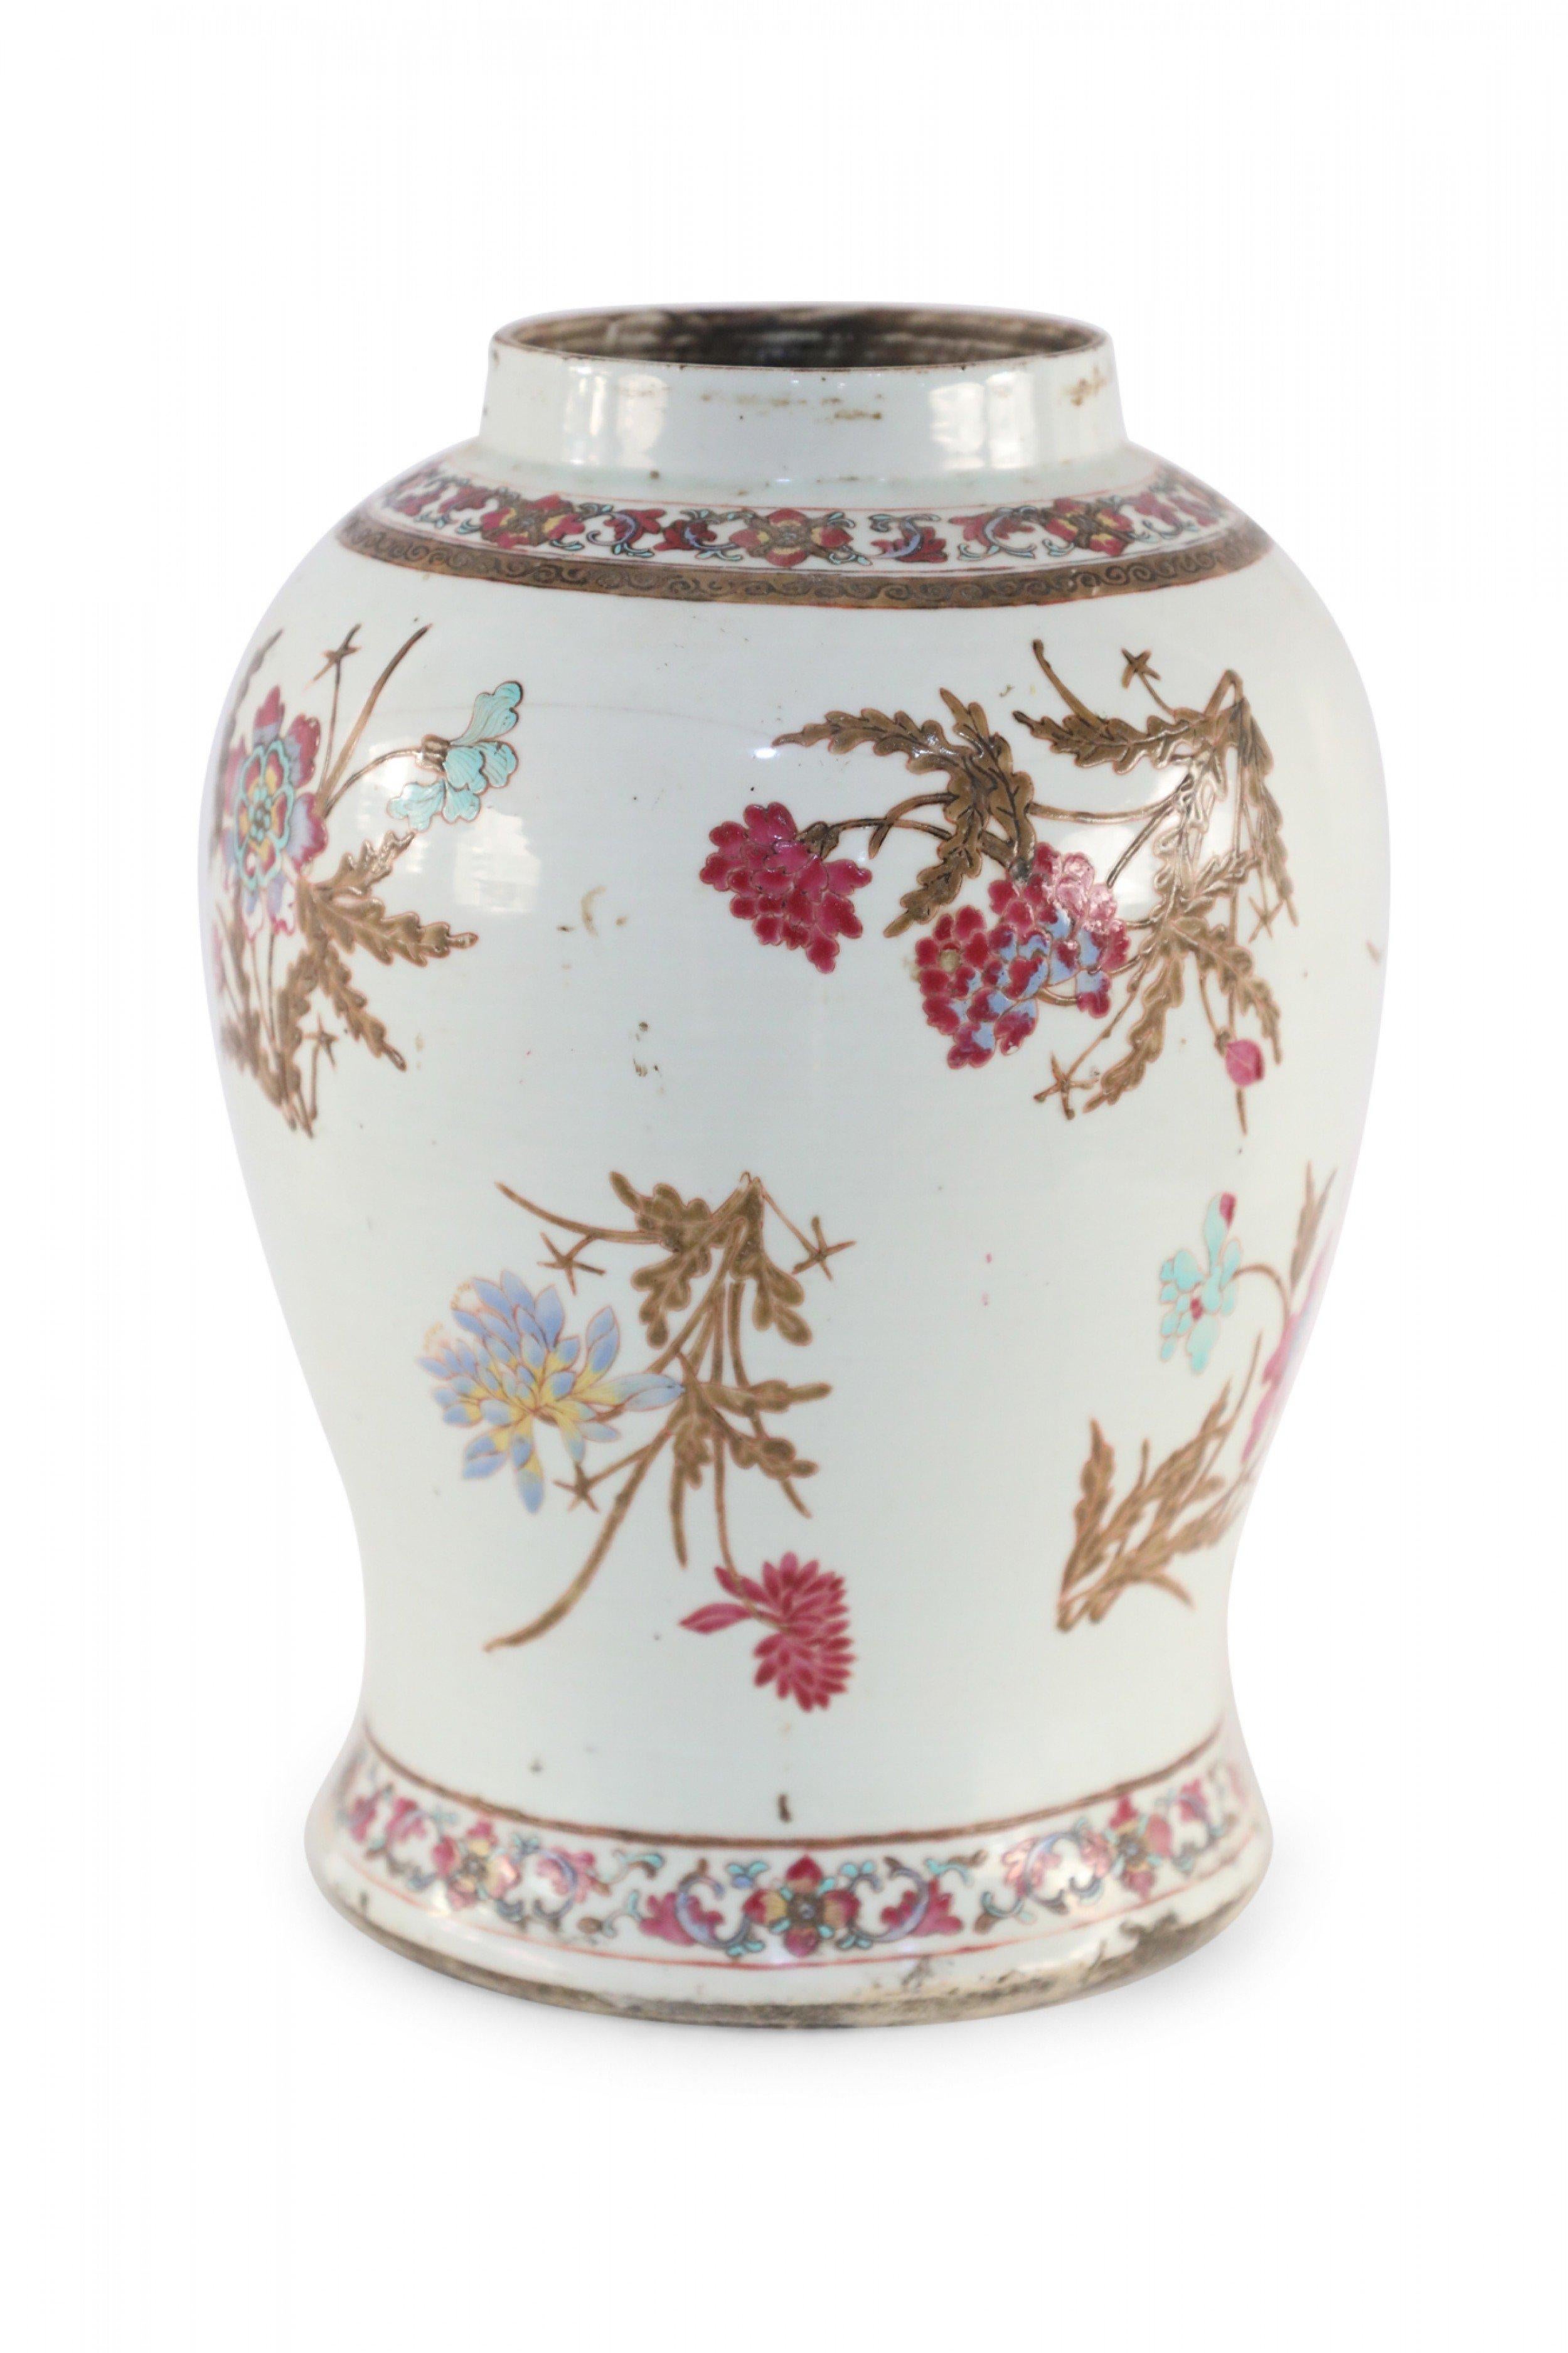 Chinese white porcelain vase decorated with incised and painted brown foliage and stems accented by magenta, light blue and yellow florals, and bands of floral garland at the opening and base.
    